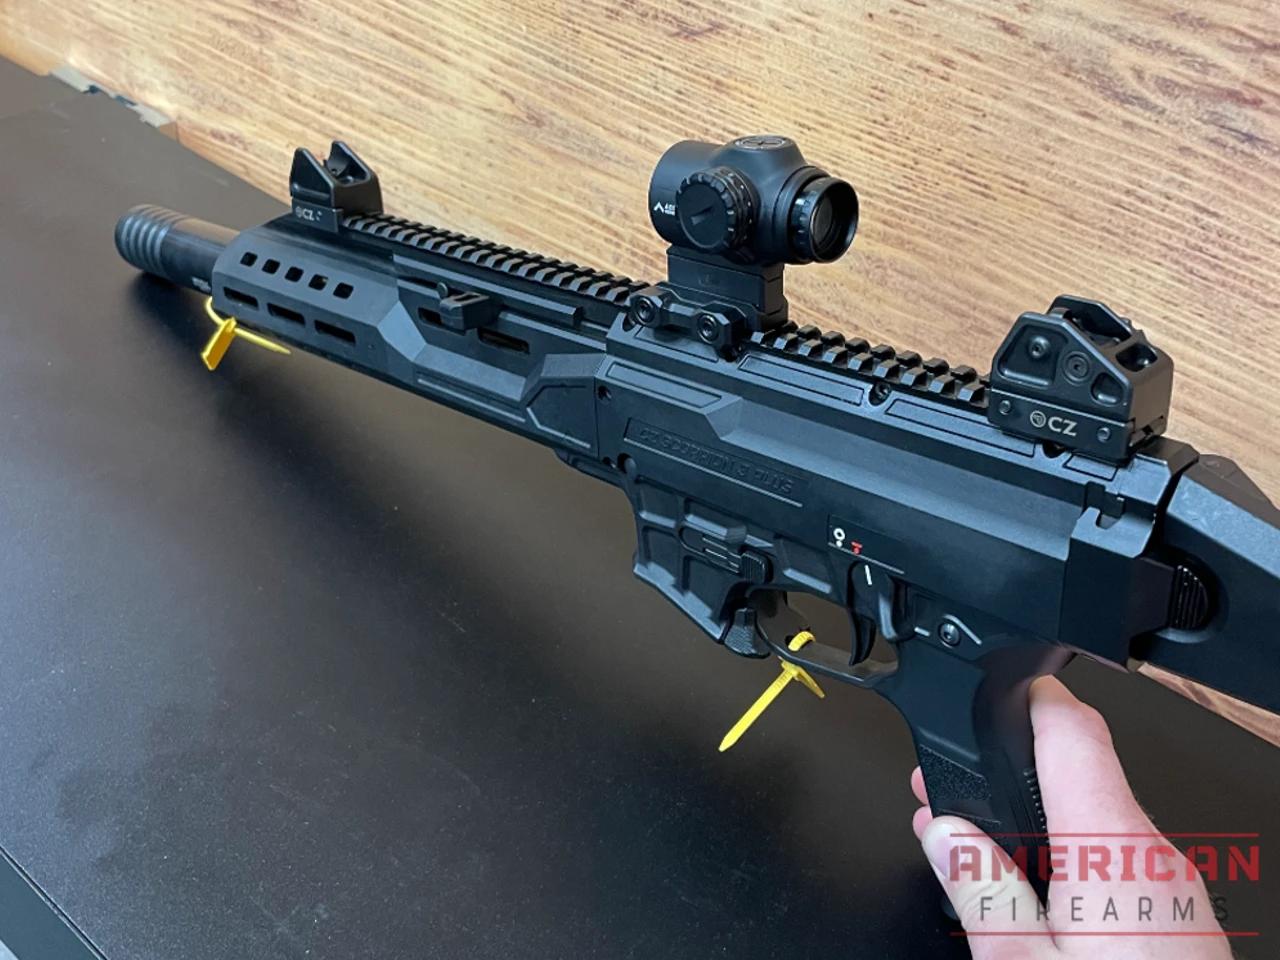 The new Scorpion 3 Plus carbine uses the same redesigned receiver (and thus magazine) as the pistol variant.